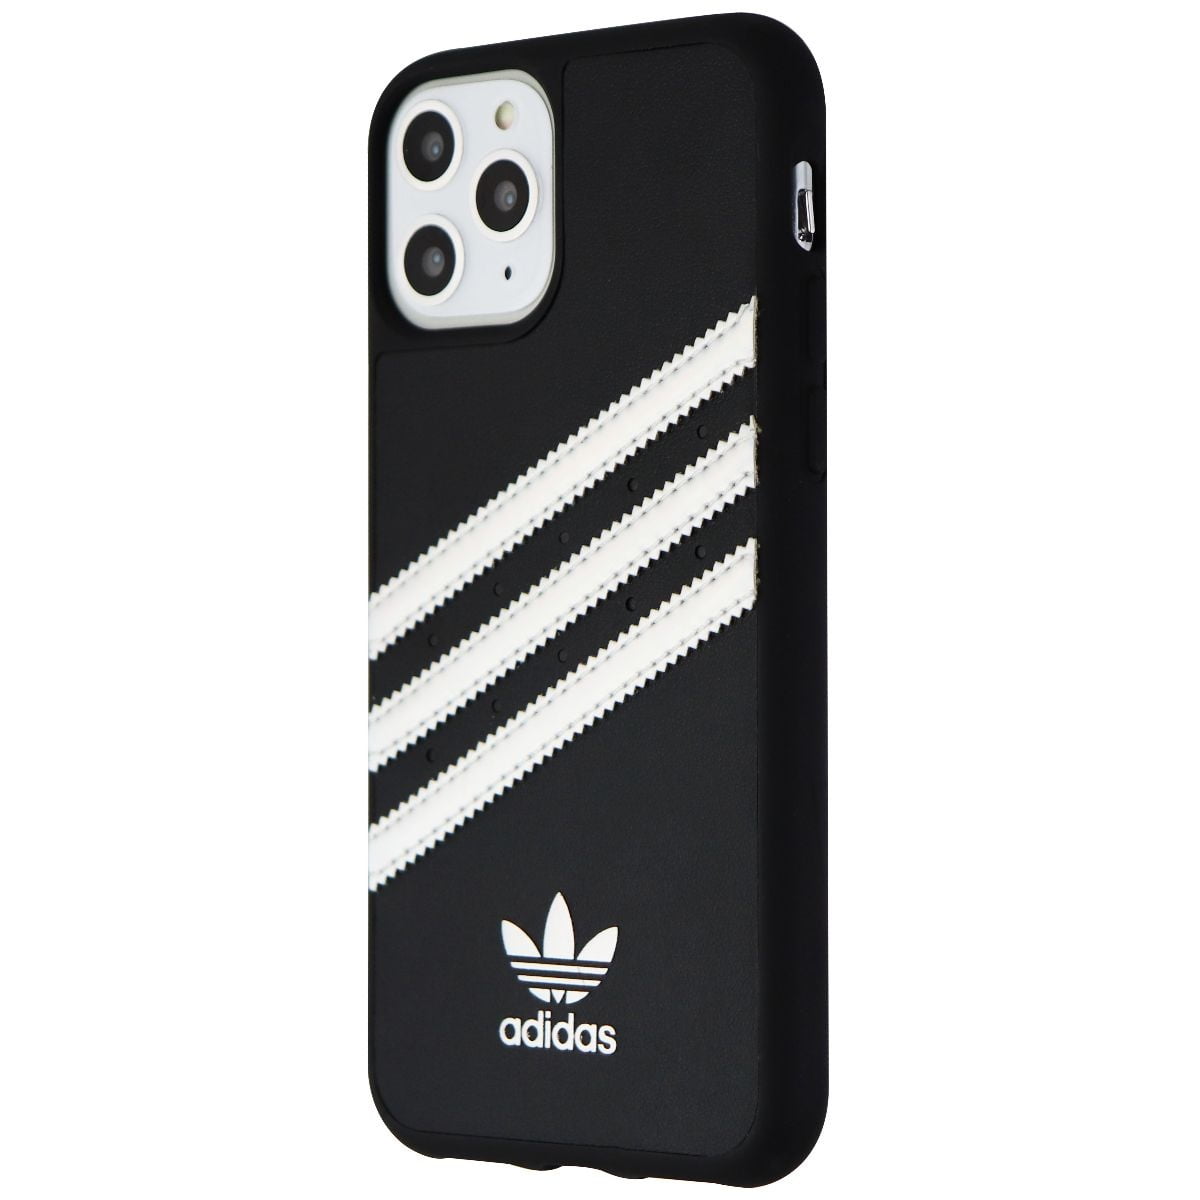 Adidas 3 Stripe Snap Series Case For Apple Iphone 11 Pro Black Holographic Walmart Canada